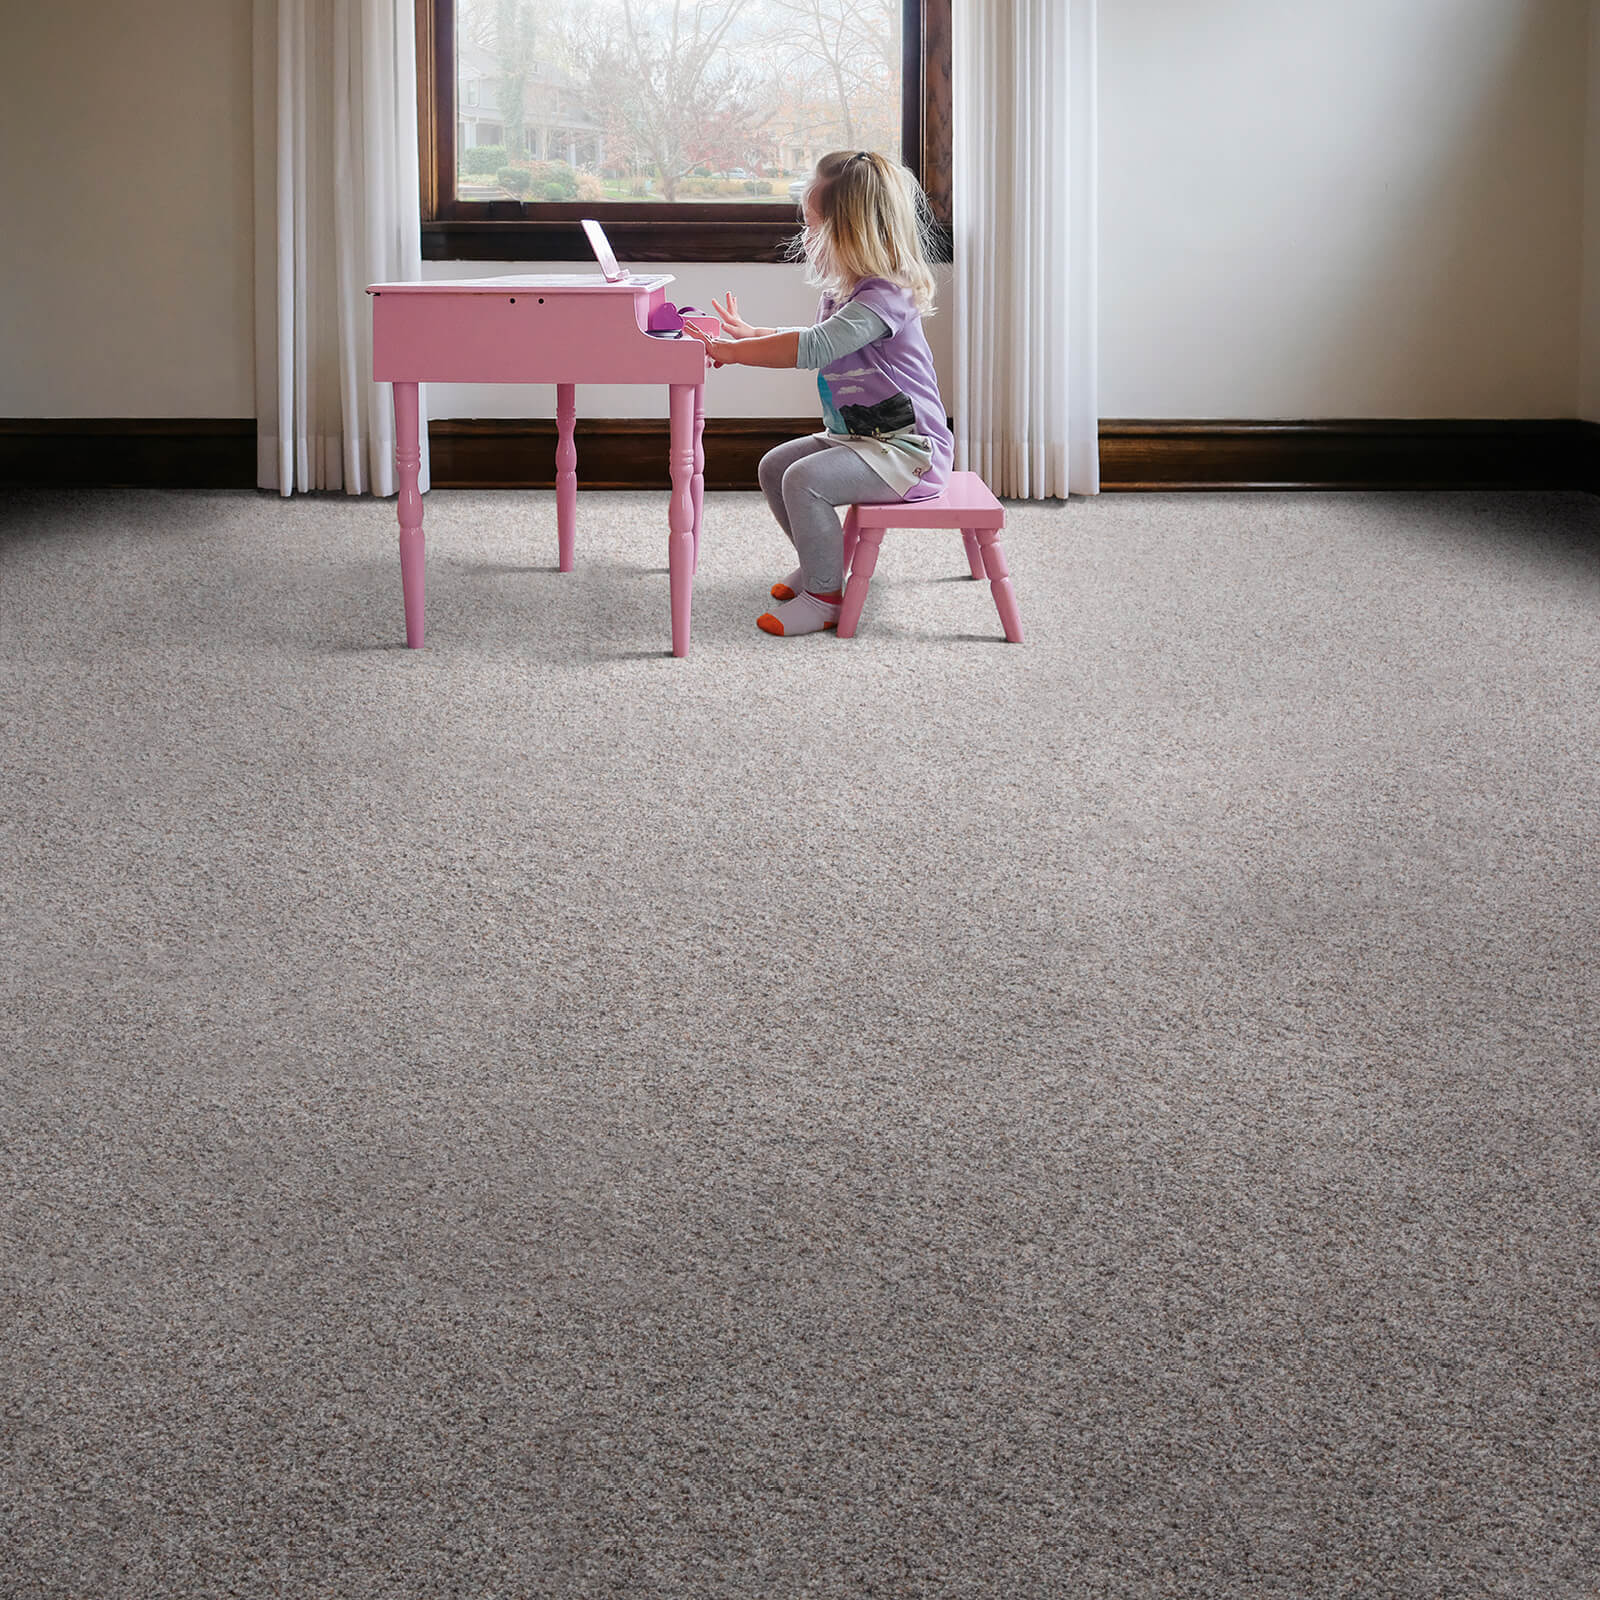 Girl with piano on Carpet flooring| Floor Dimensions